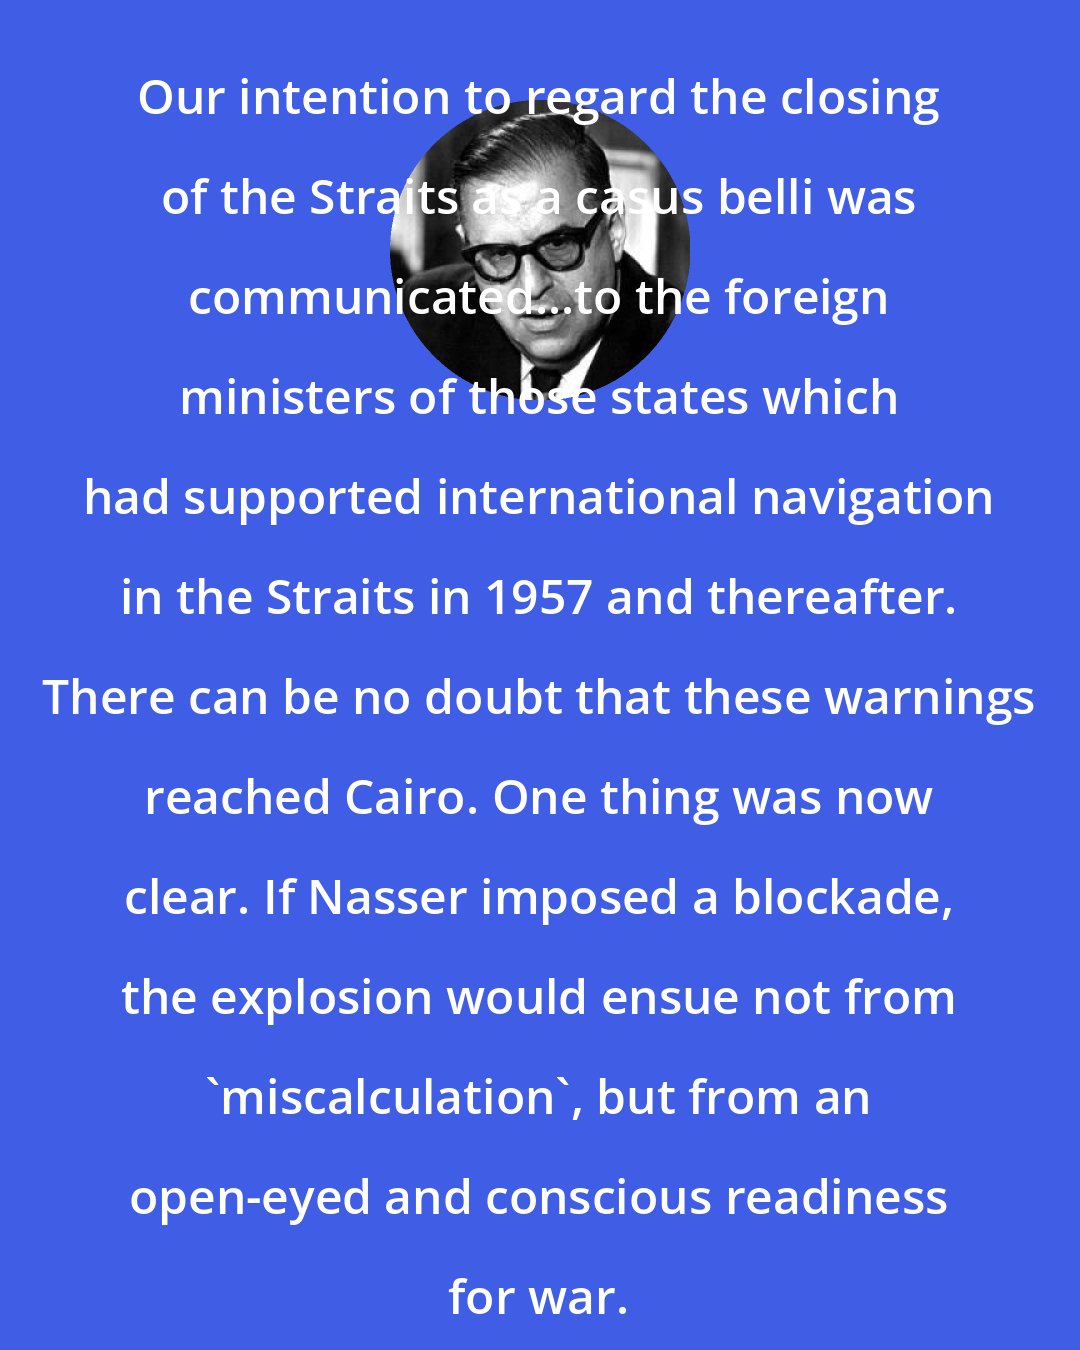 Abba Eban: Our intention to regard the closing of the Straits as a casus belli was communicated...to the foreign ministers of those states which had supported international navigation in the Straits in 1957 and thereafter. There can be no doubt that these warnings reached Cairo. One thing was now clear. If Nasser imposed a blockade, the explosion would ensue not from 'miscalculation', but from an open-eyed and conscious readiness for war.